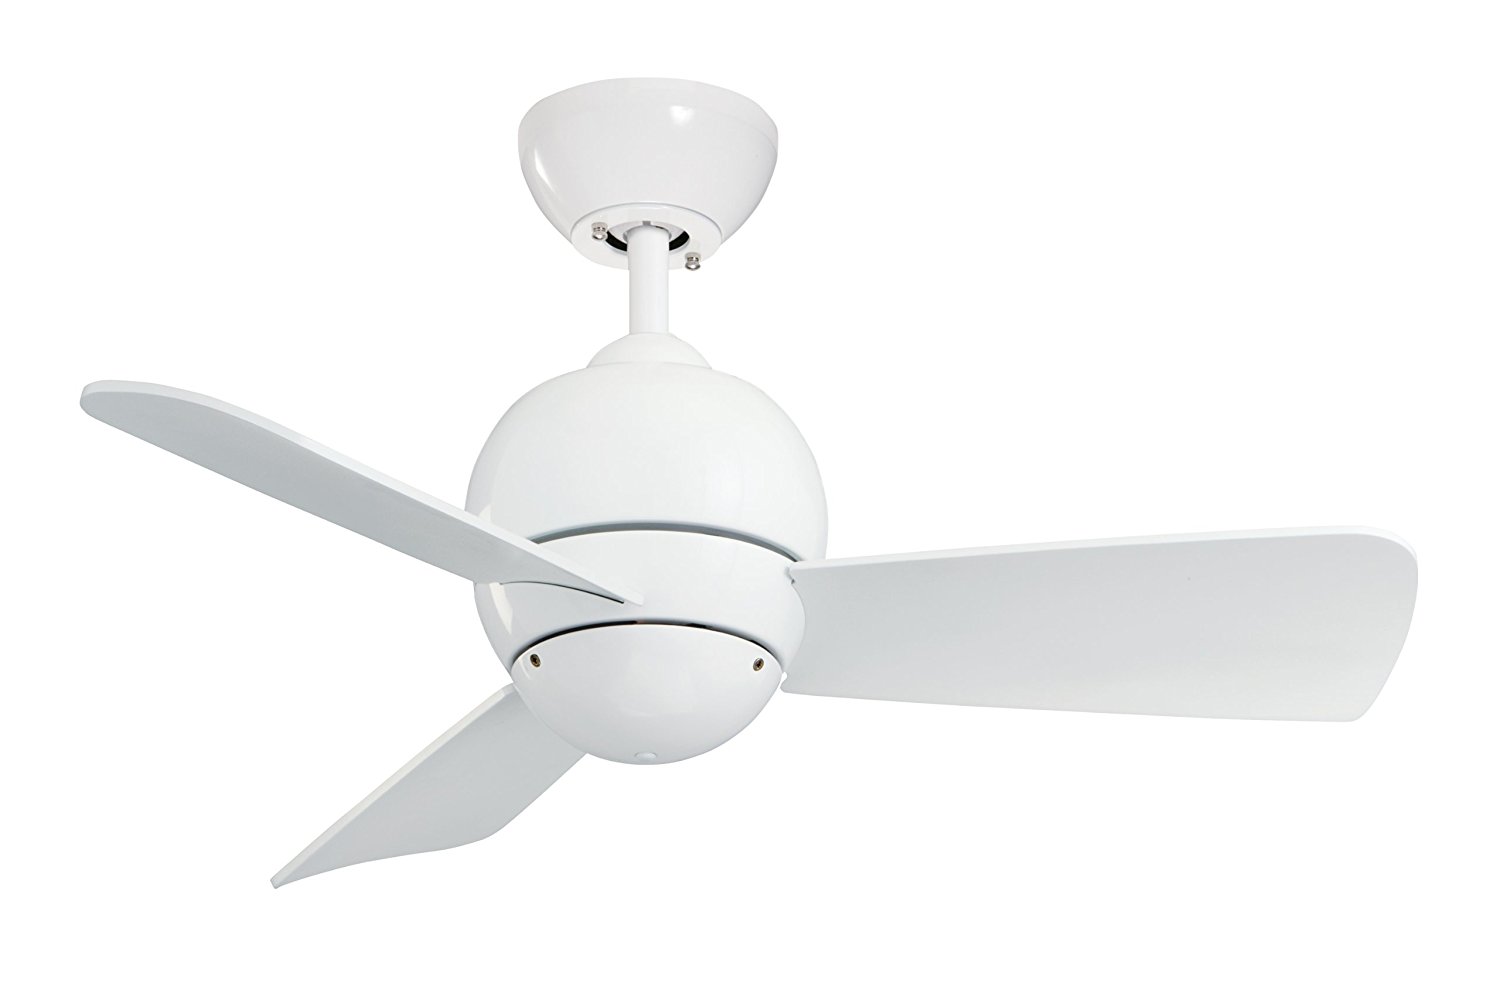 Emerson Ceiling Fans CF130WW Tilo Modern Low Profile/Hugger Indoor Outdoor Ceiling Fan, Damp Rated, 30-Inch Blades, Light Kit Adaptable, Appliance White Finish